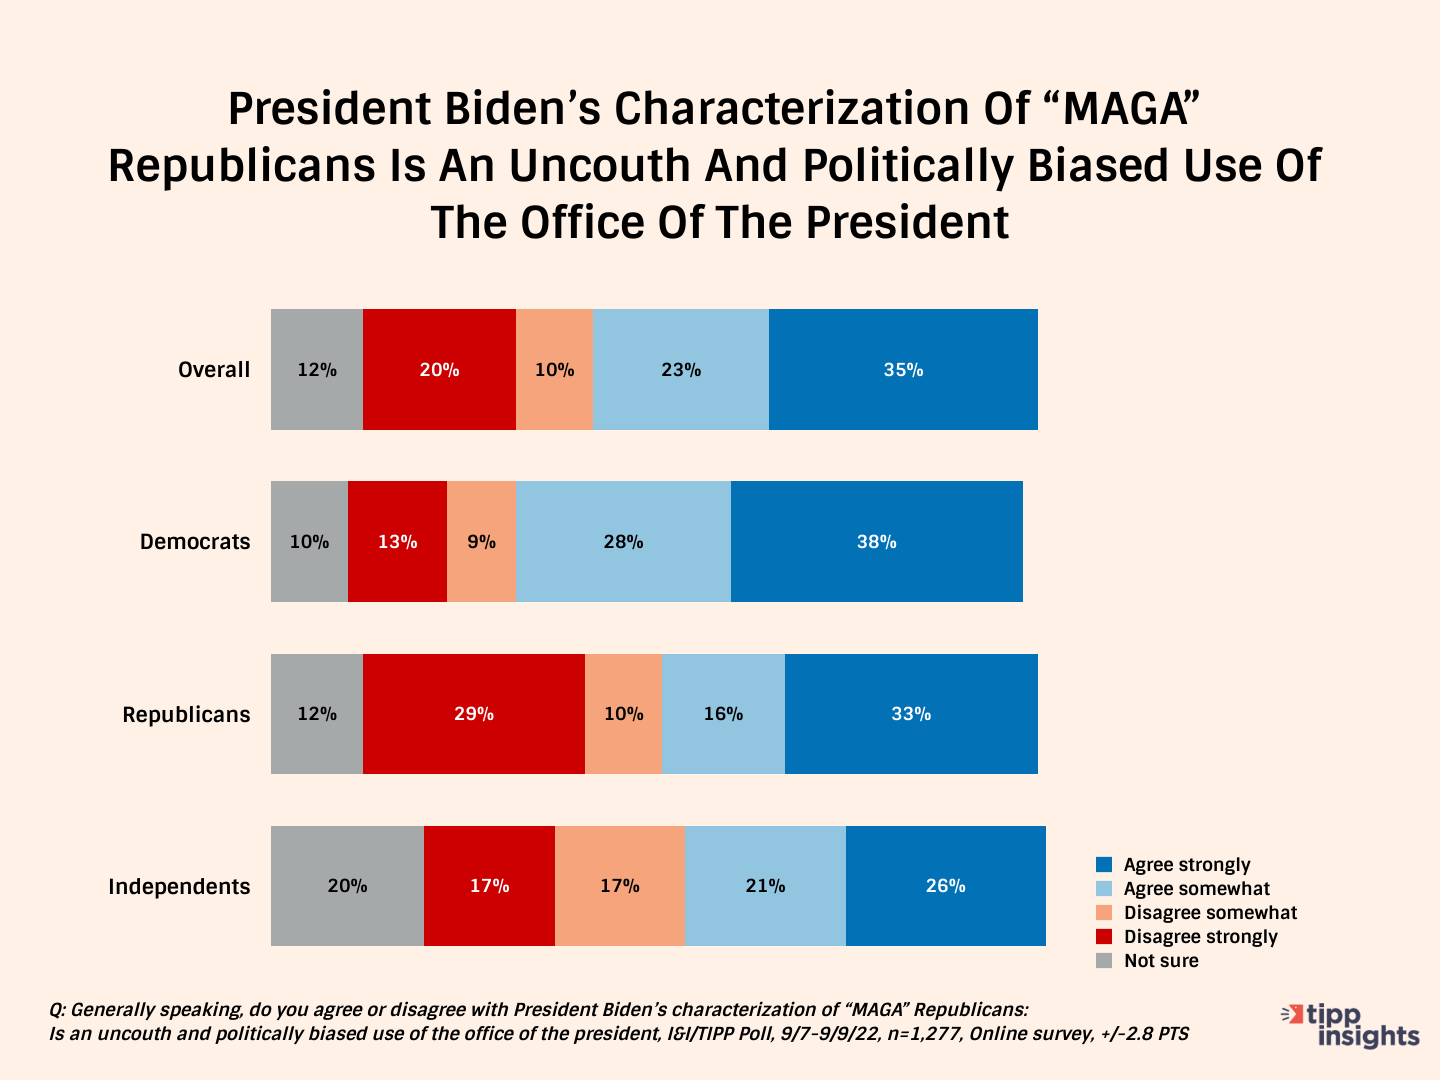 I&I/TIPP Poll Results 9/7-9/9/22: Do Americans think that President Bidens Characterization of "MAGA" Republicans as being a danger to Democracy politically biased and uncouth use of the office of the president?